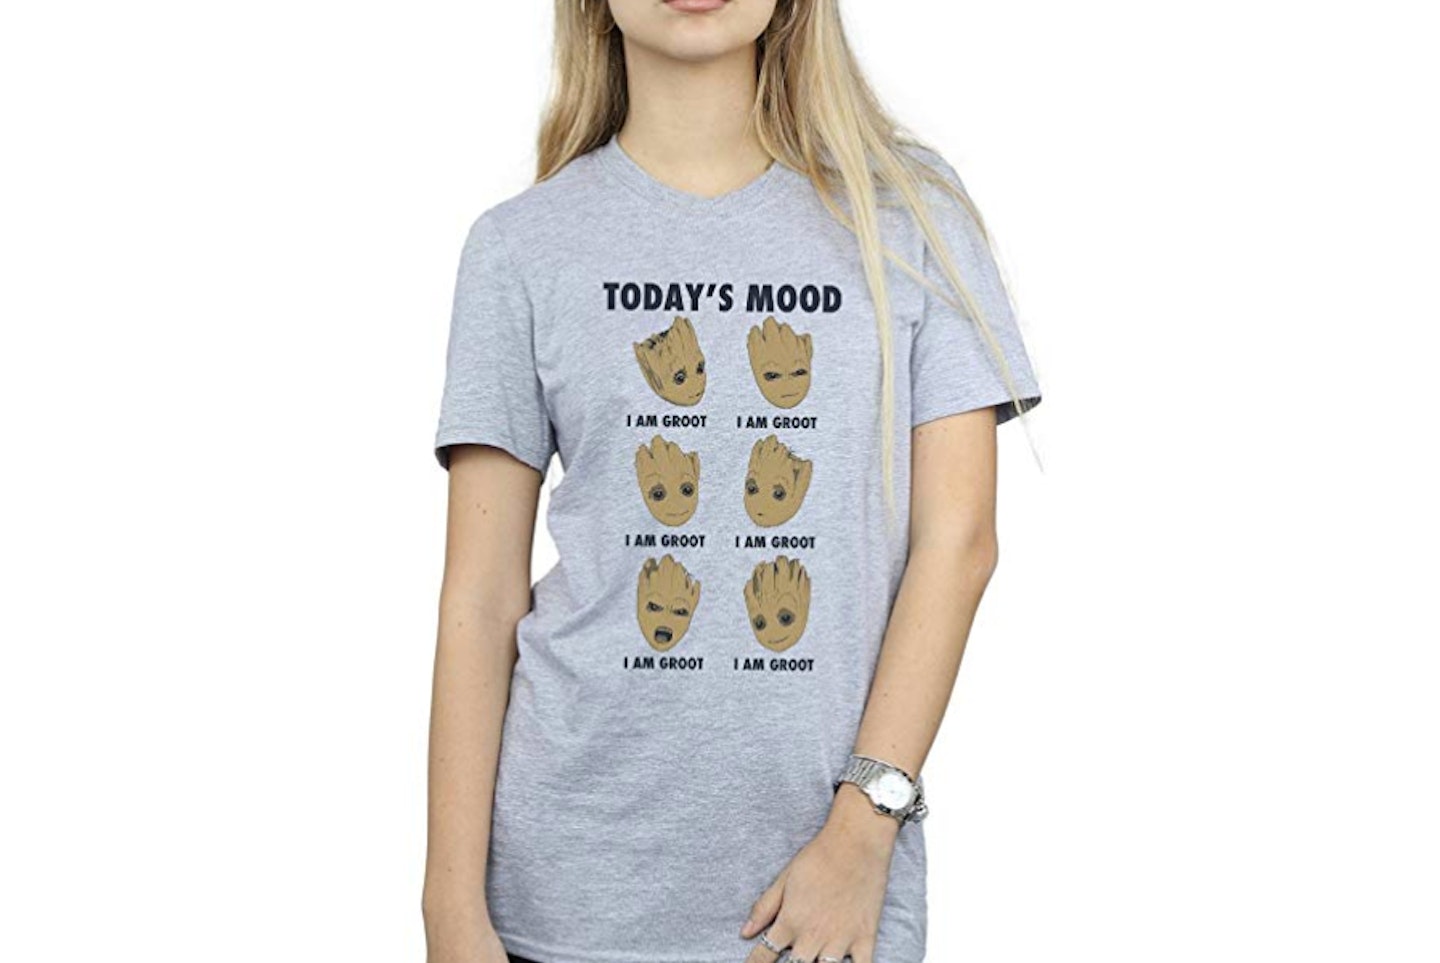 Marvel Women's Guardians of The Galaxy Groot Today's Mood Boyfriend Fit T-Shirt, £15.99